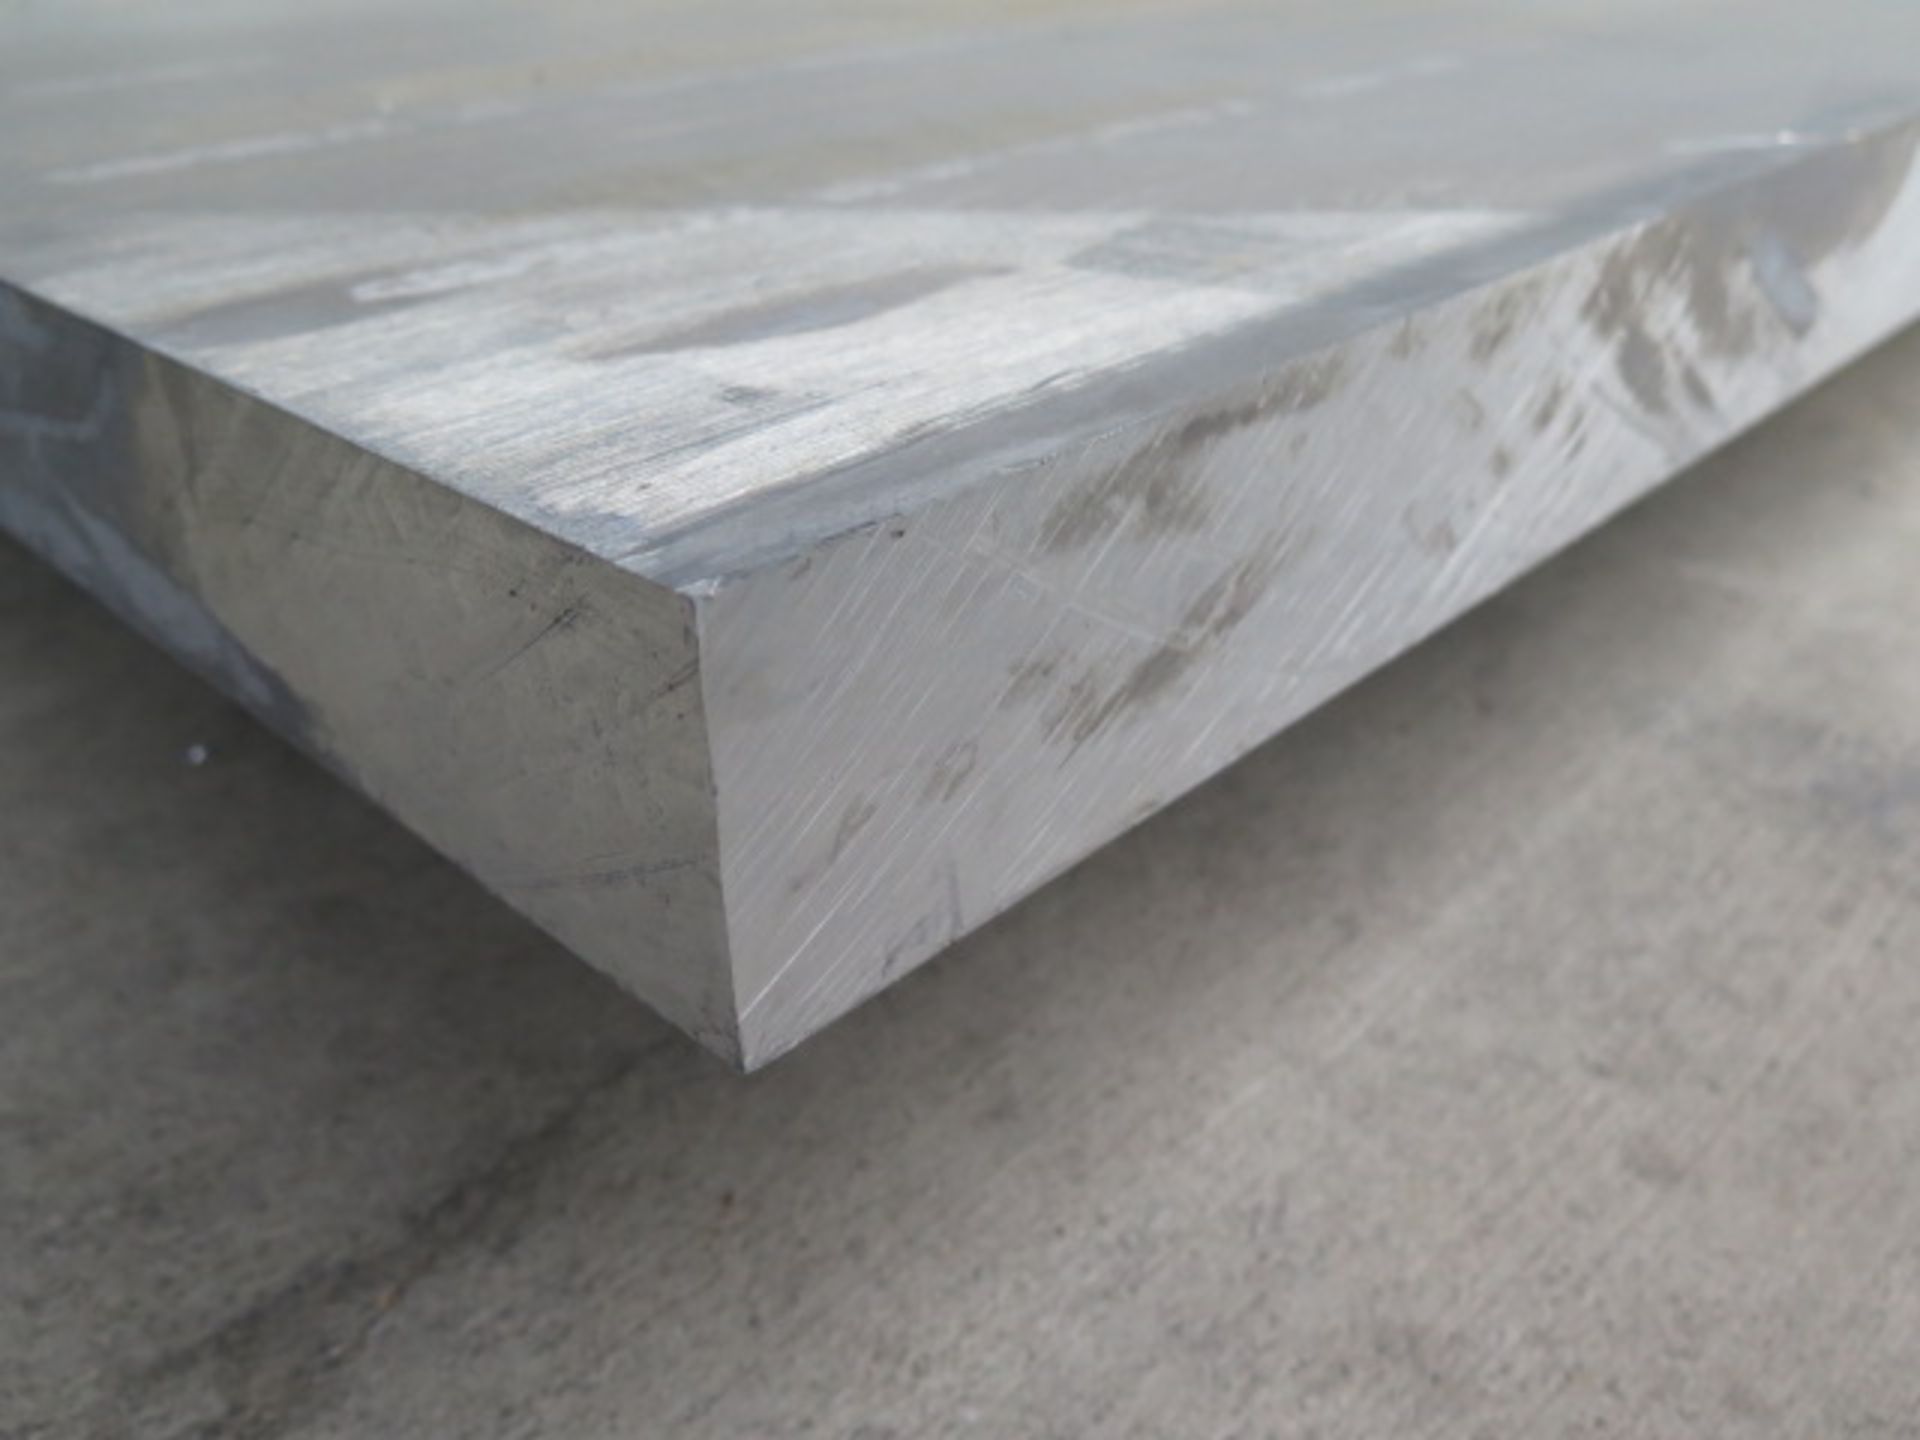 60" x 97" x 2.5" 6061-T651 Aluminum Plate (SOLD AS-IS - NO WARRANTY) - Image 3 of 4